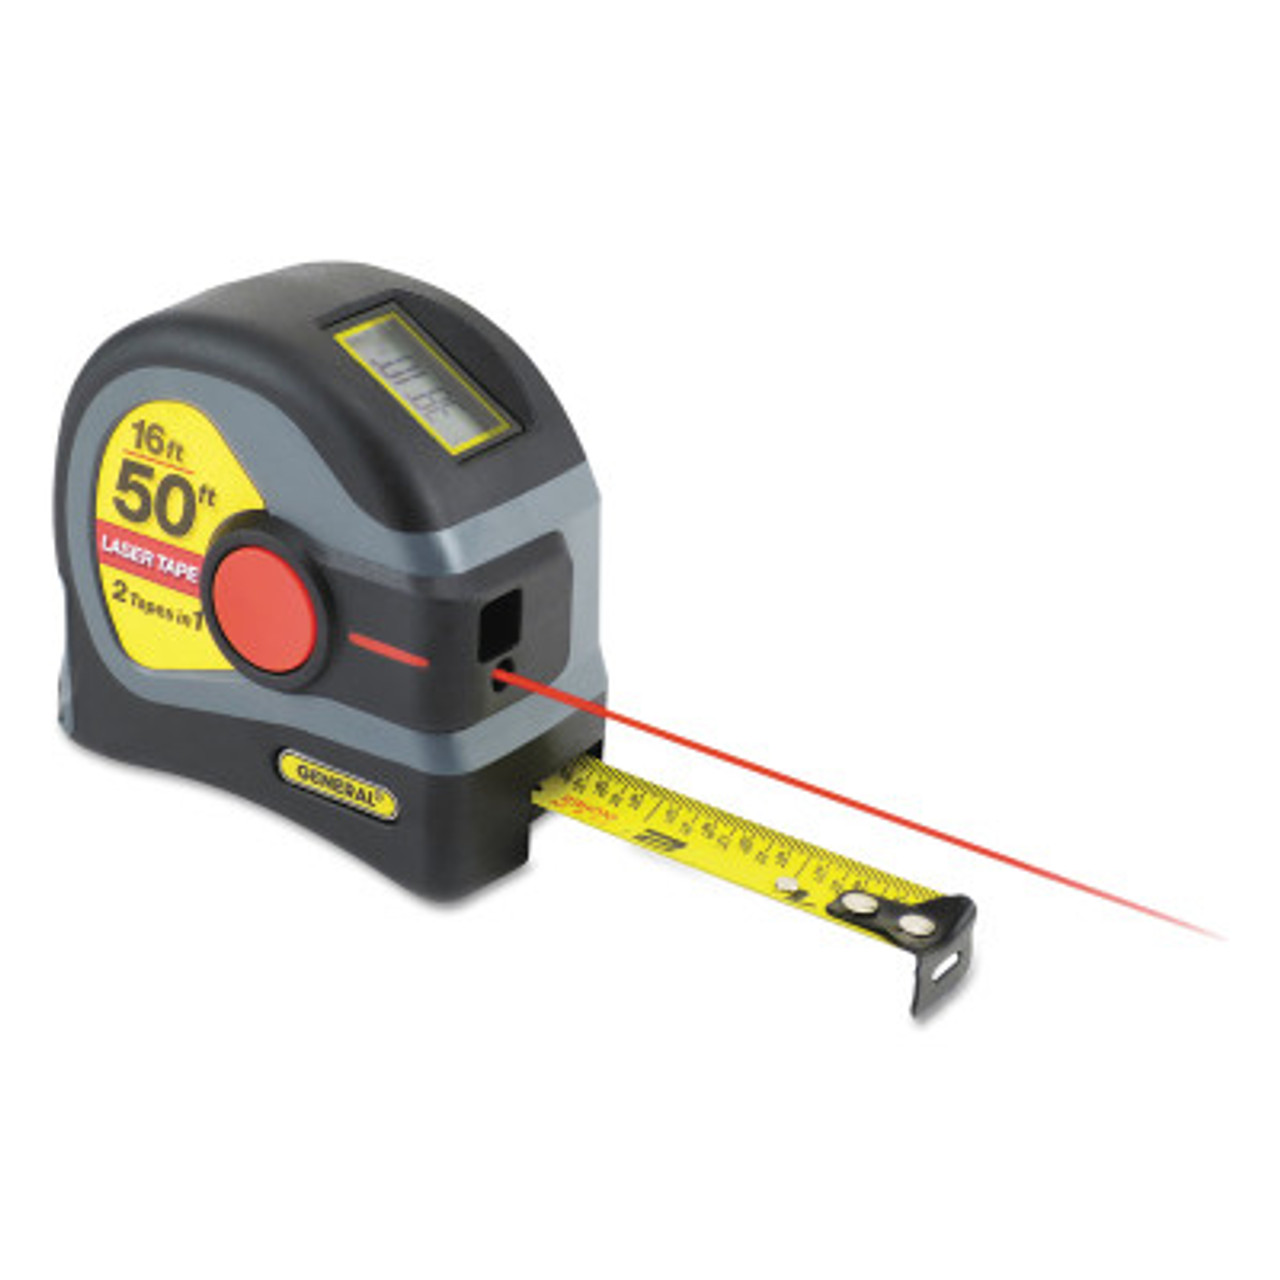 Measuring tape 16 ft x 3/4 inches and metric